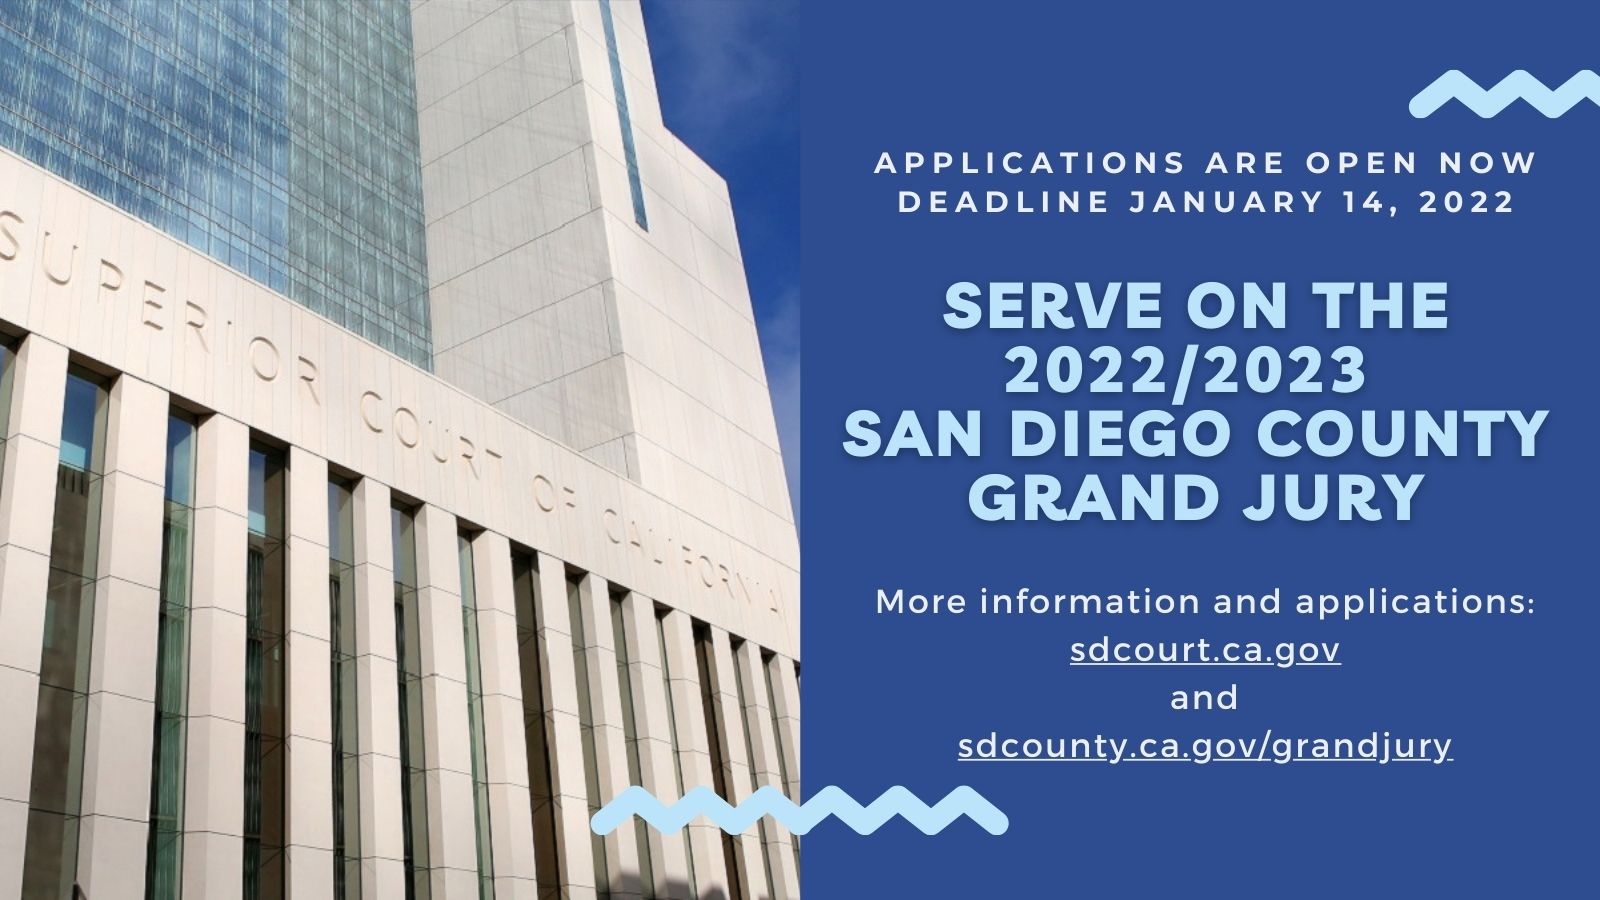 San Diego County Grand Jury Looking for New Applicants